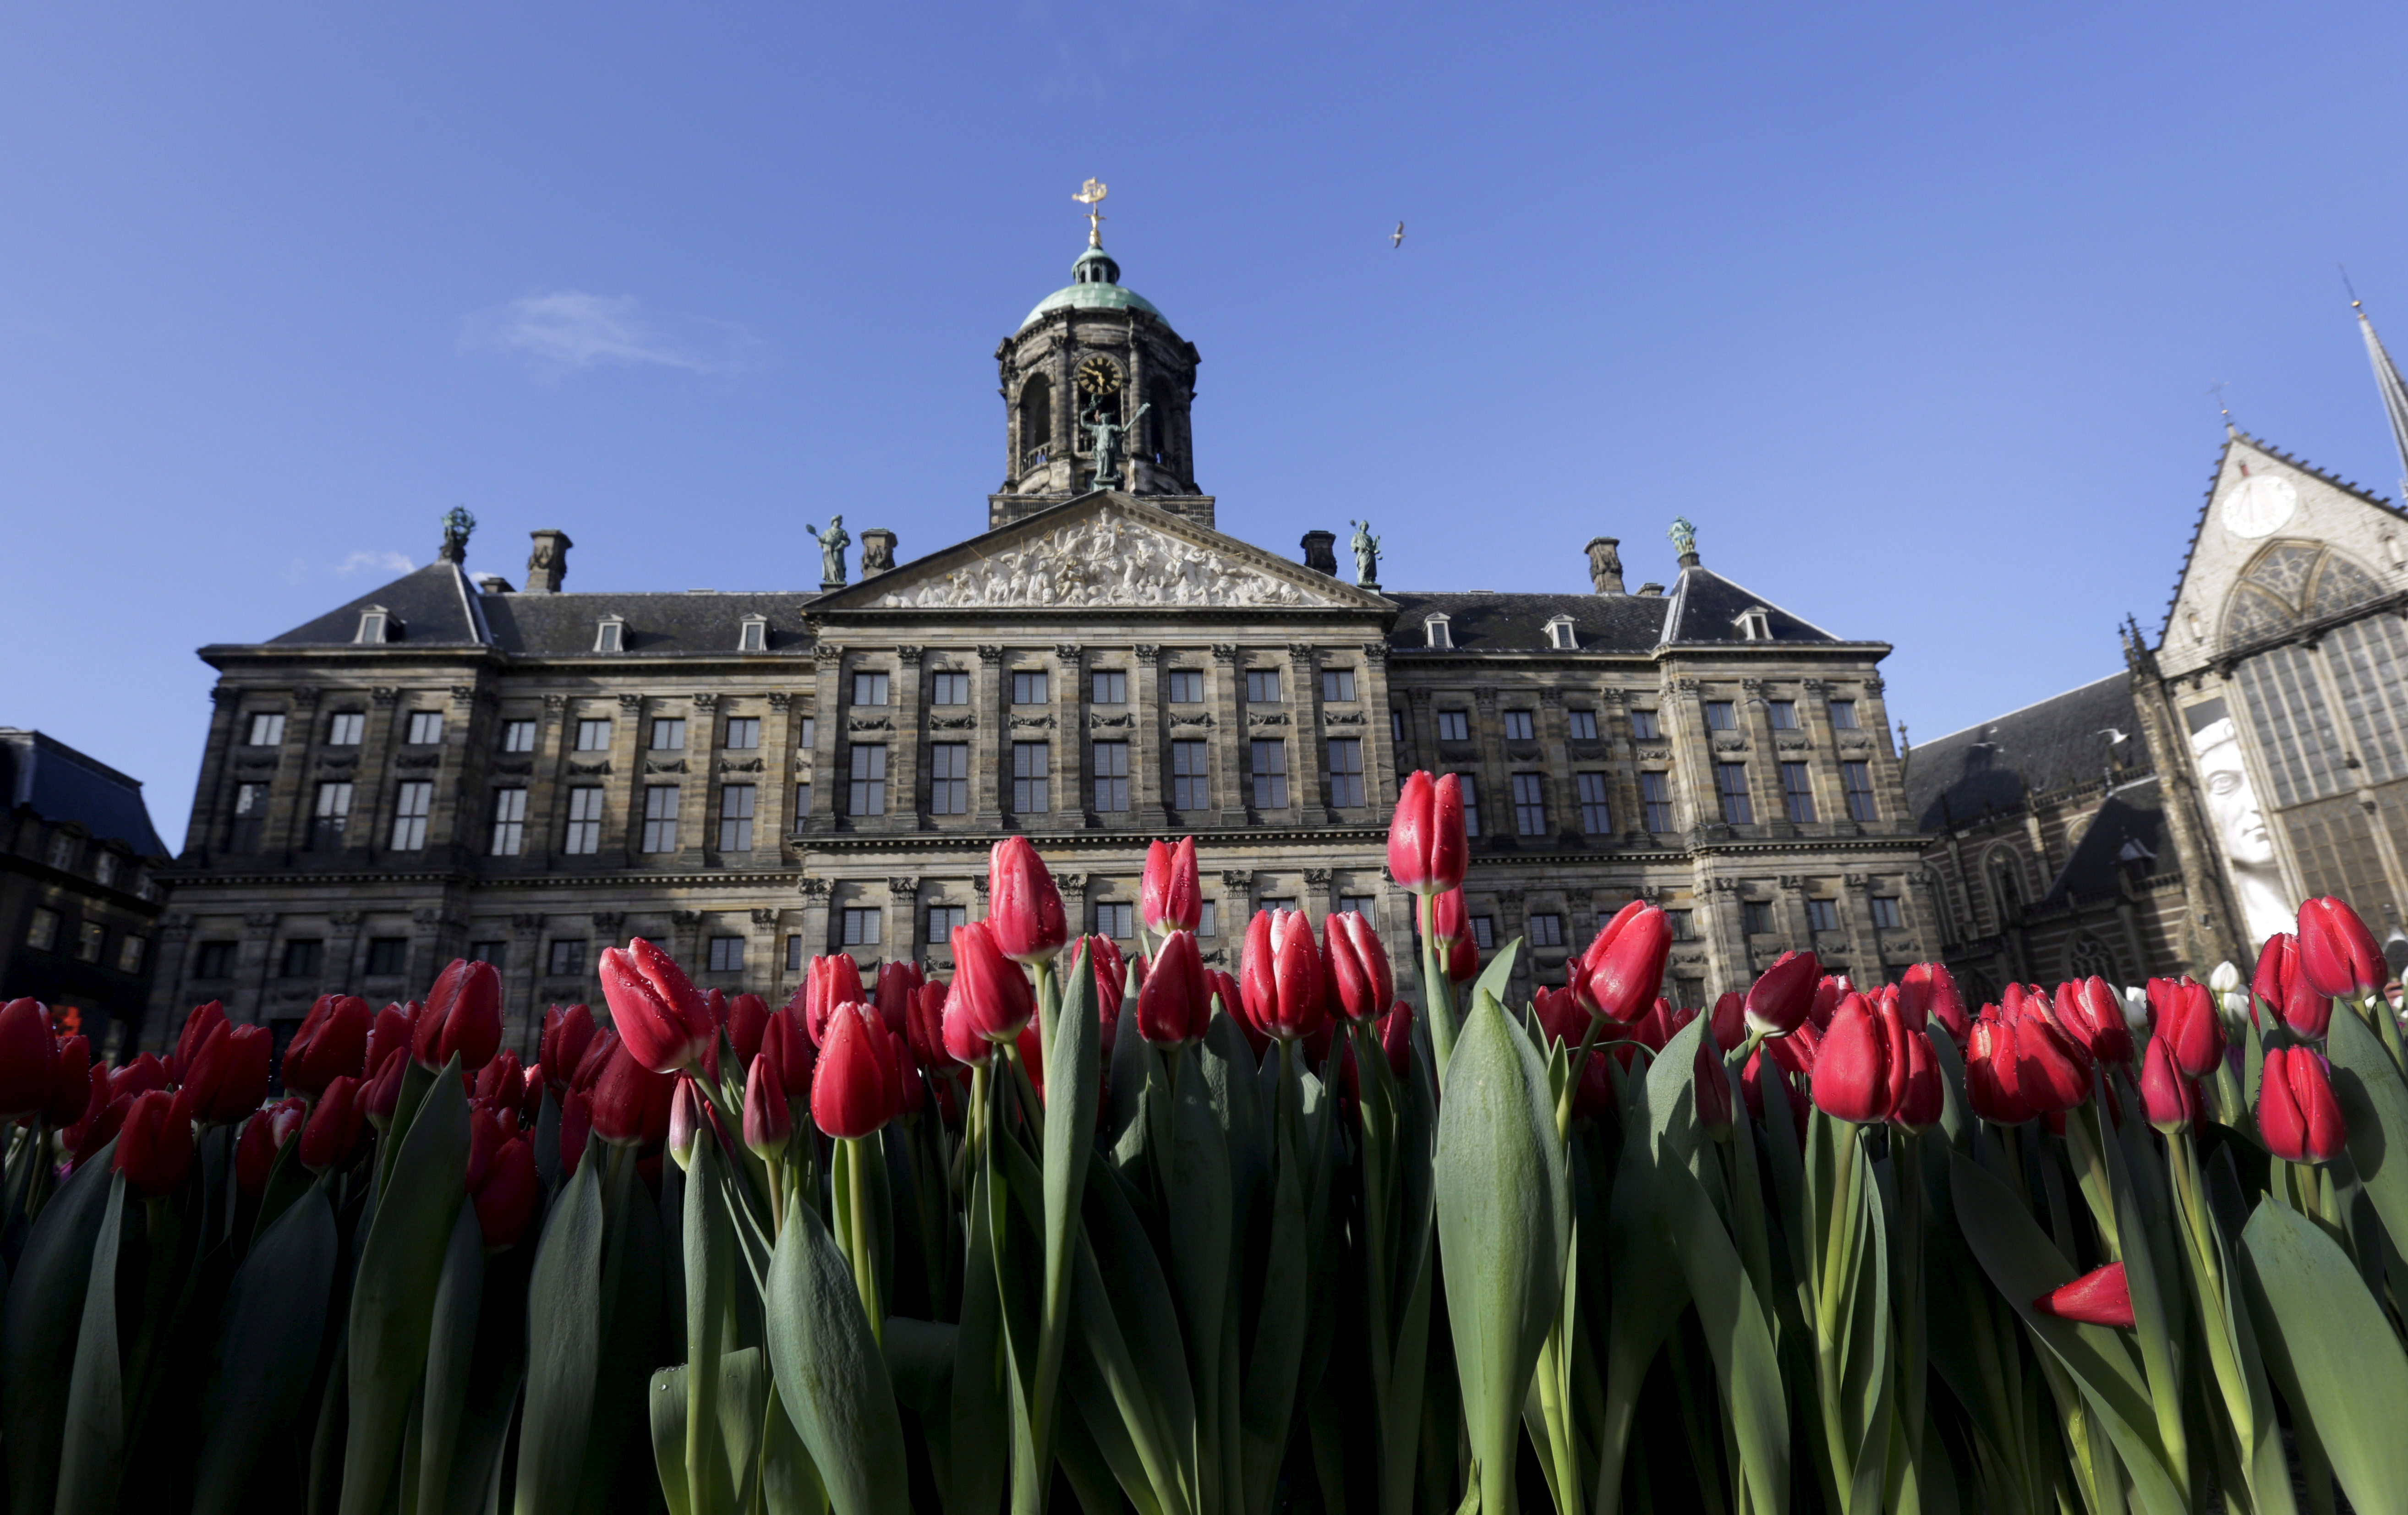 Tulips are seen placed in front of the Royal Palace at the Dam Square to celebrate the beginning of the tulip season in Amsterdam